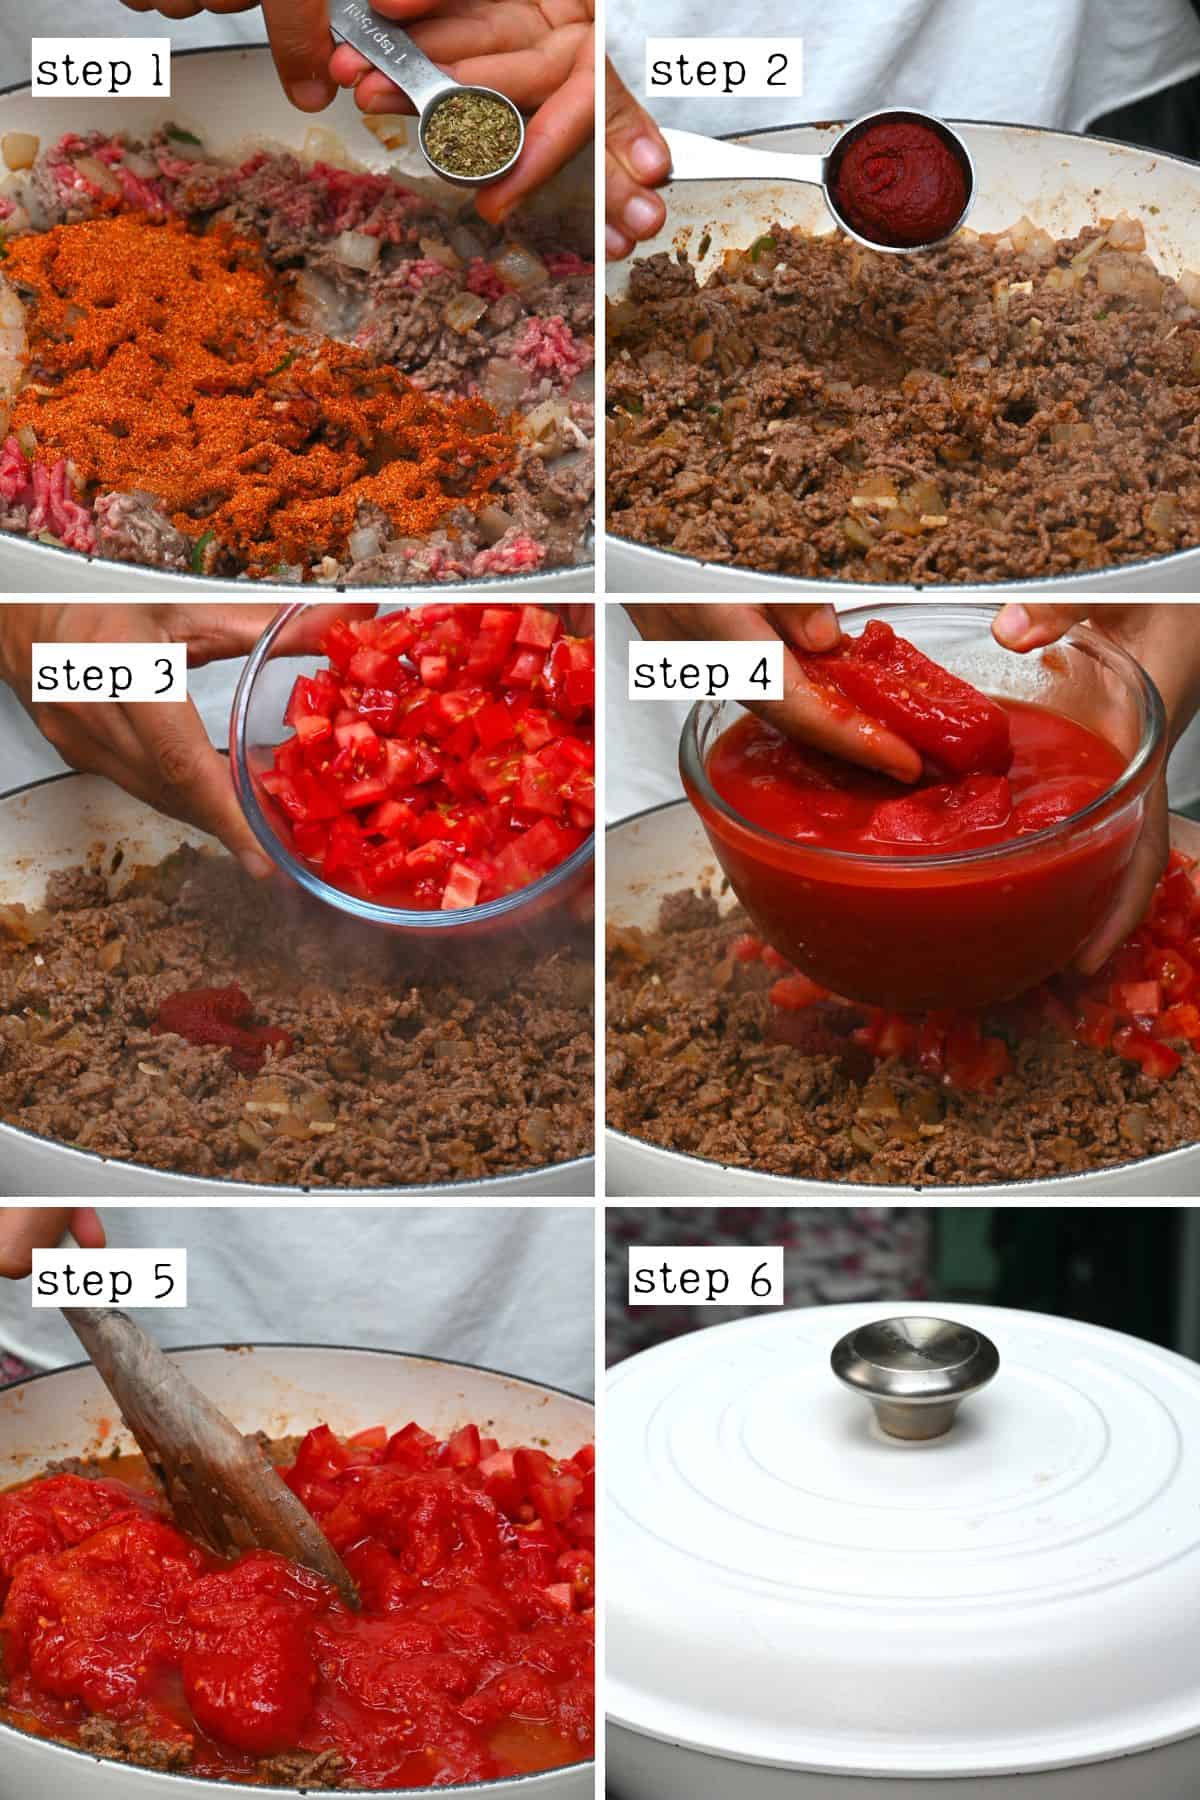 Steps for cooking beef with tomatoes for chili